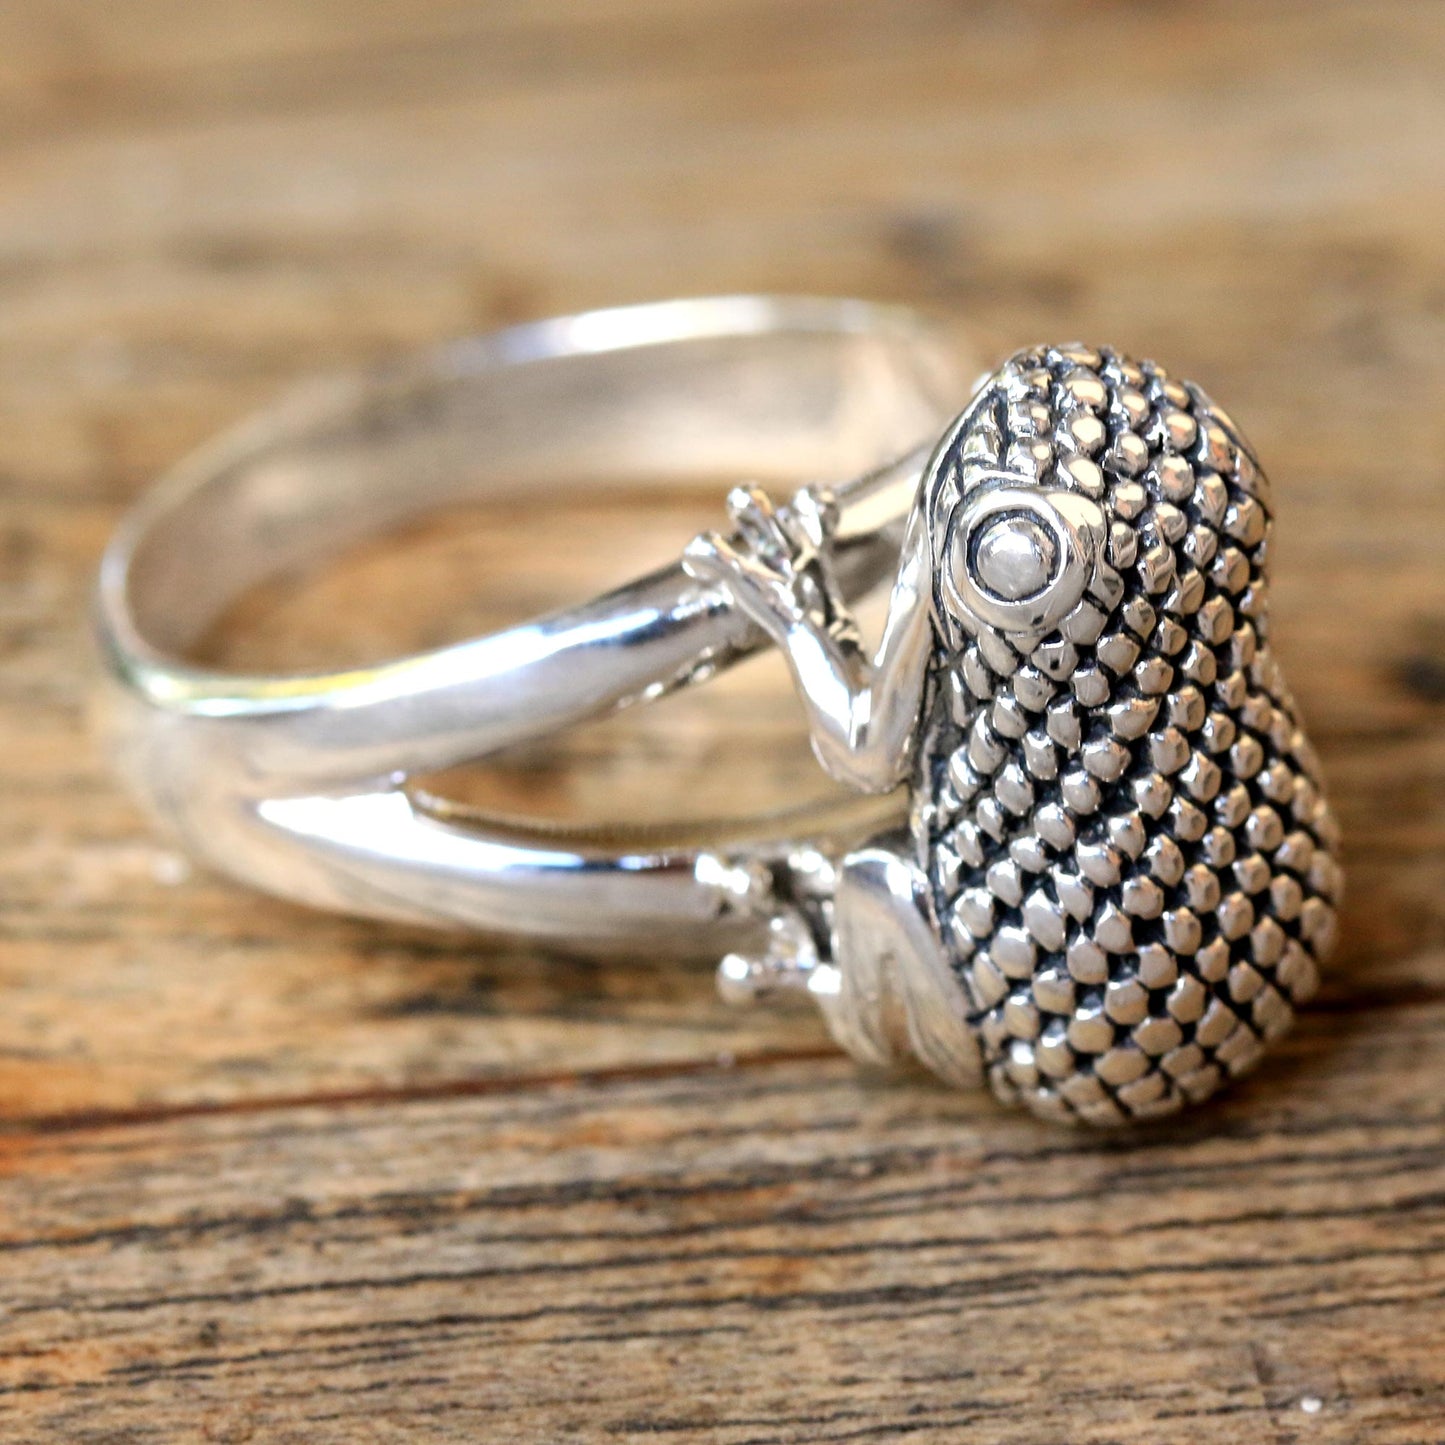 Crouching Frog Sterling Silver Frog Cocktail Ring from Bali